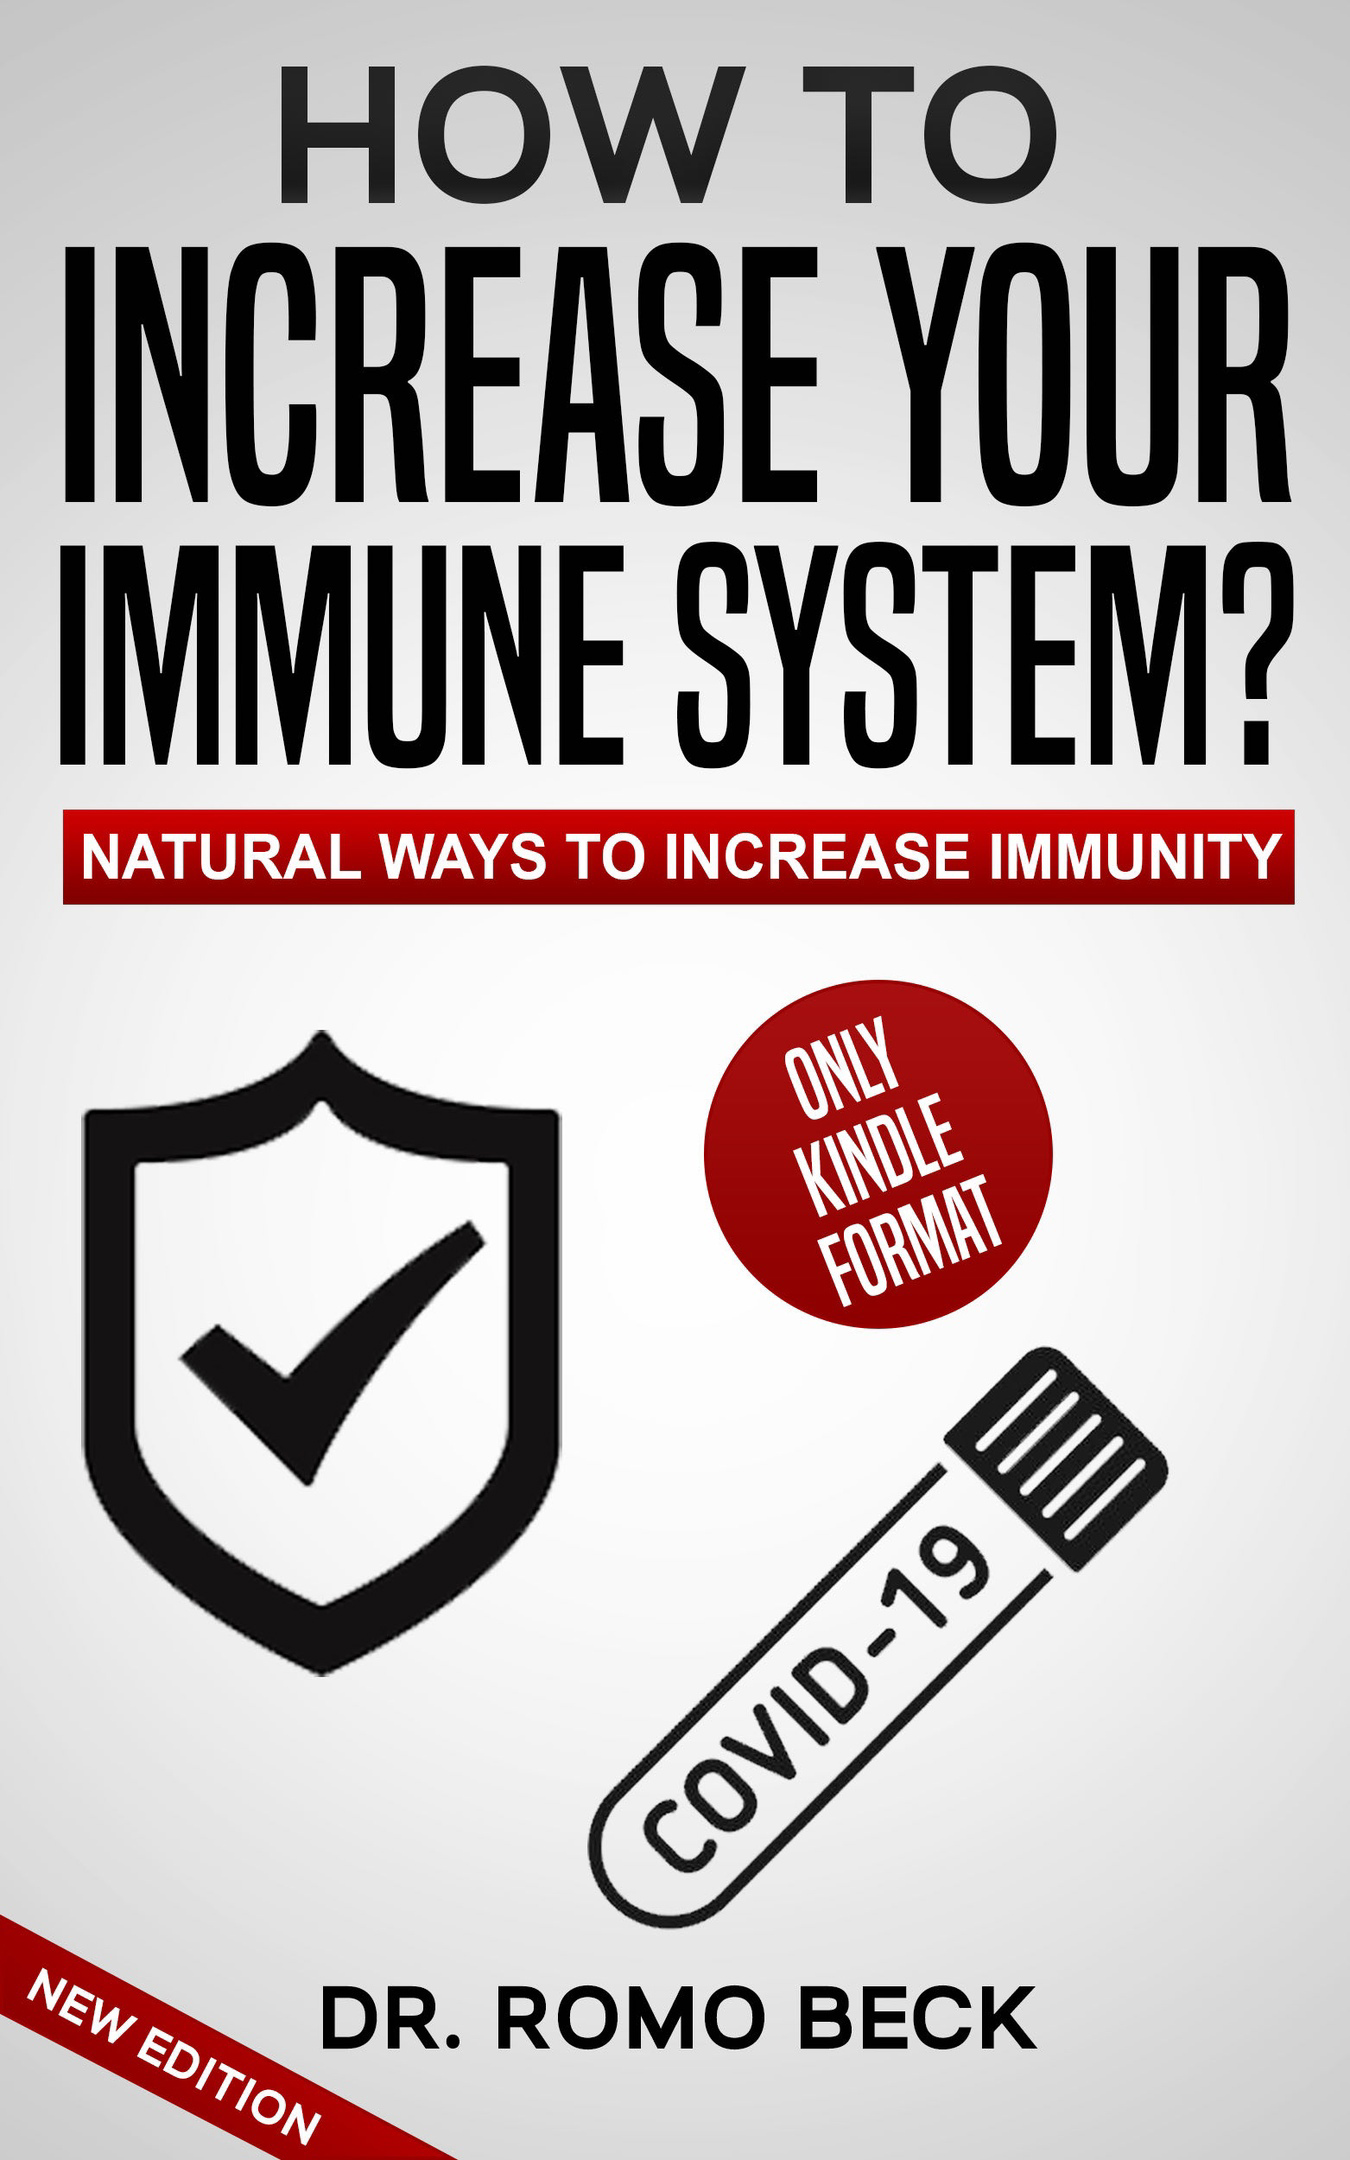 FREE: How to Increase Your Immune System? Natural Ways to Increase Immunity by Dr. Romo Beck